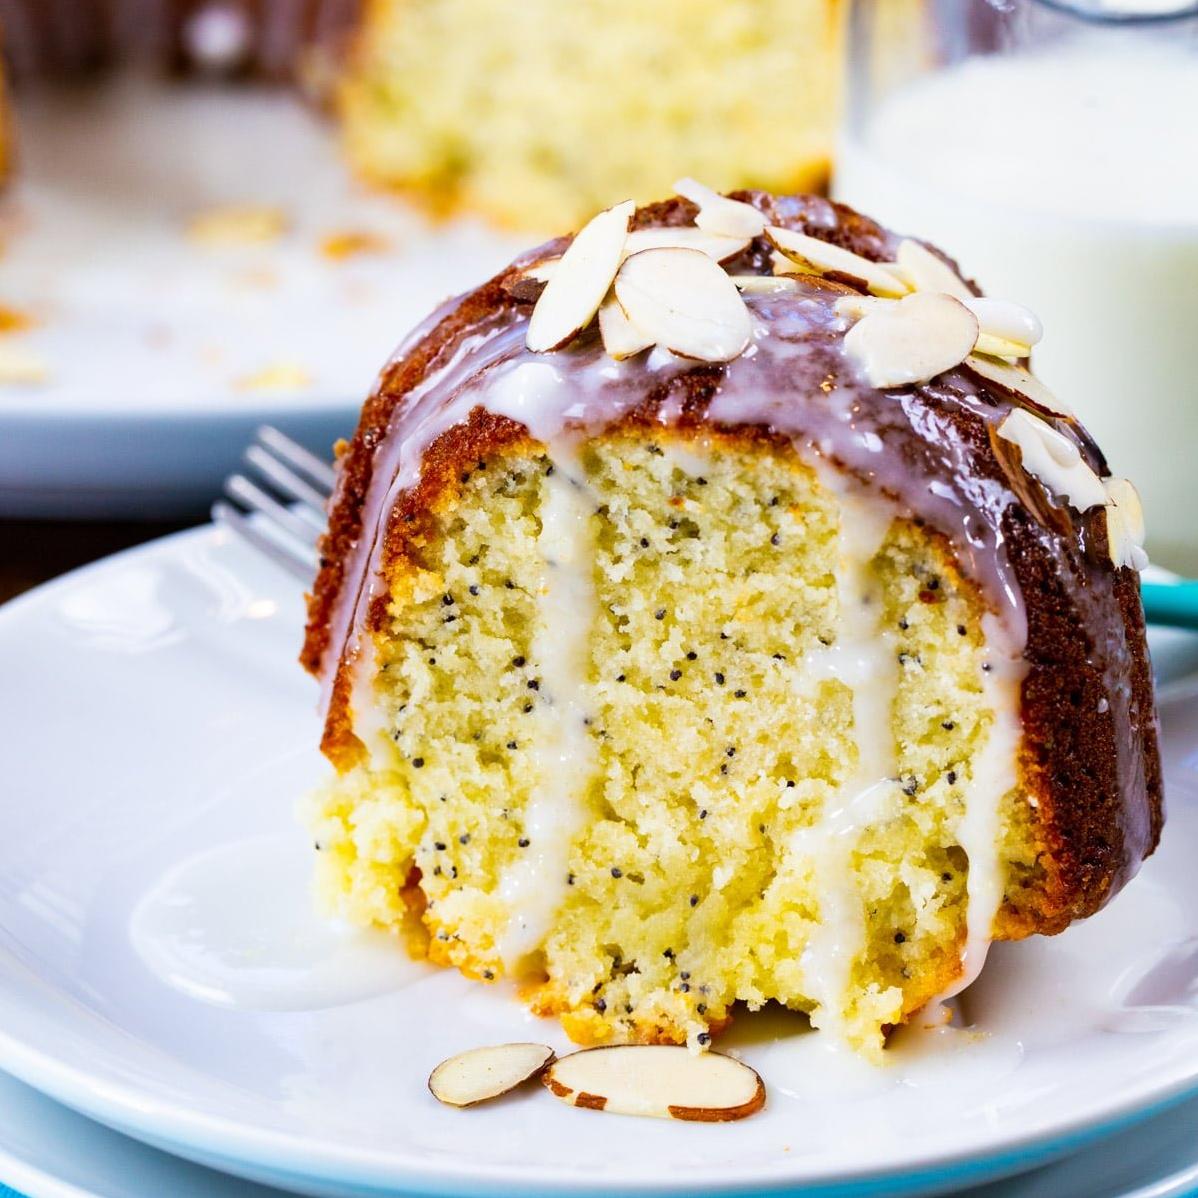 Delight Your Taste Buds with Almond Poppy Seed Pound Cake